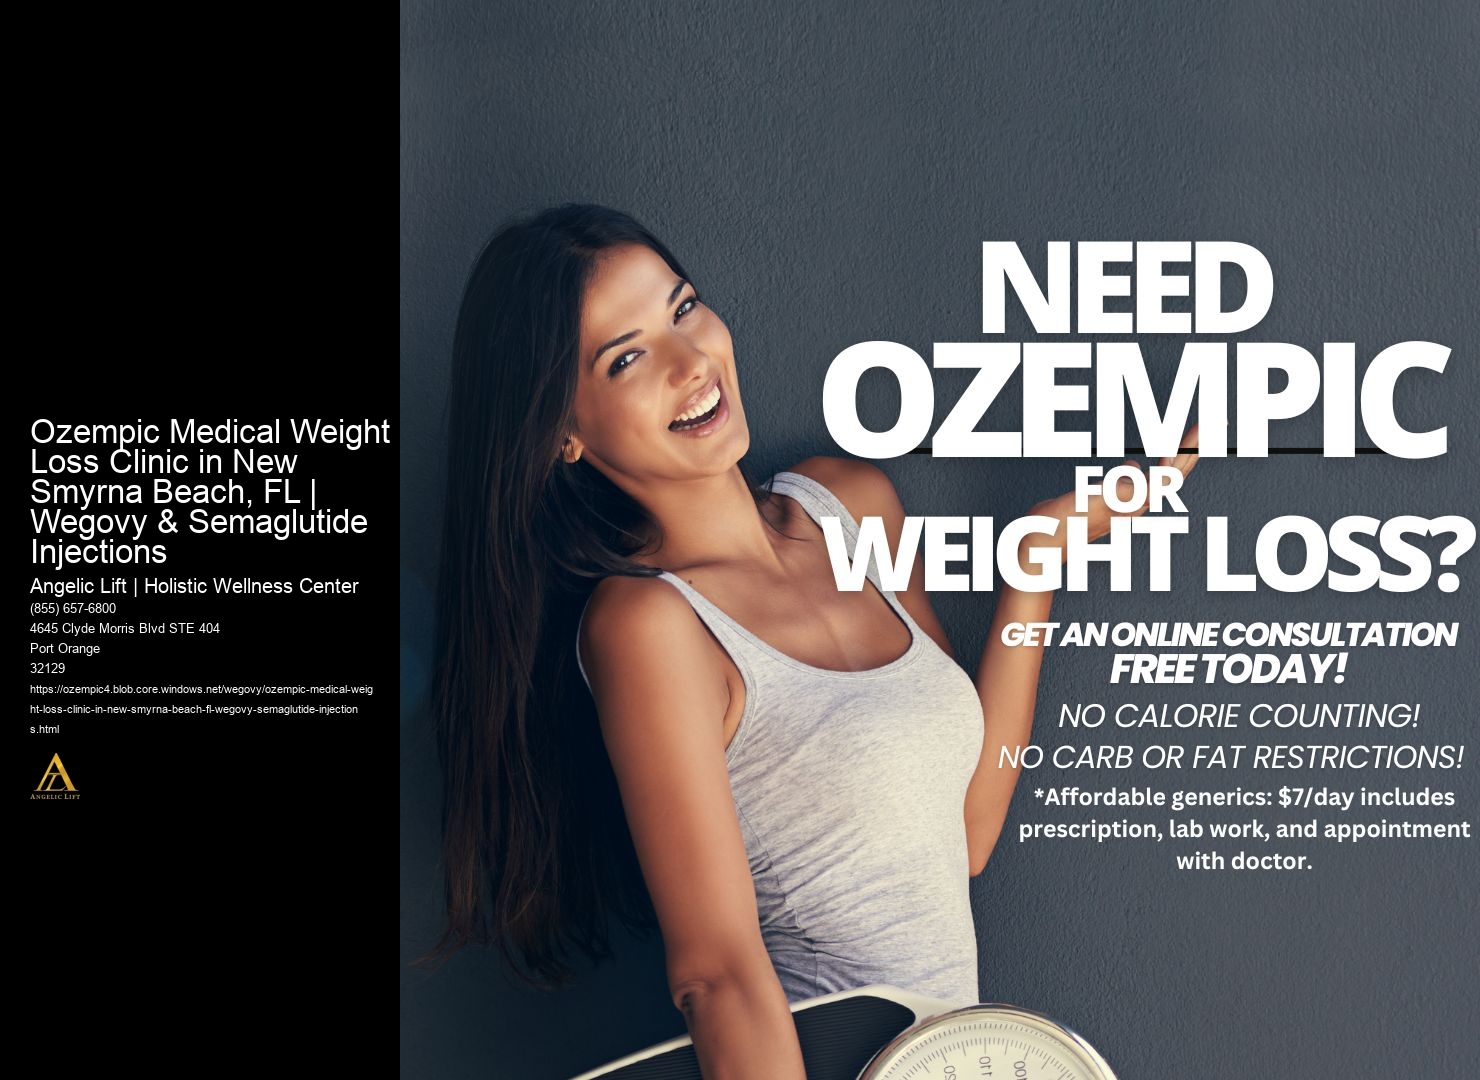 Ozempic Medical Weight Loss Clinic in New Smyrna Beach, FL | Wegovy & Semaglutide Injections